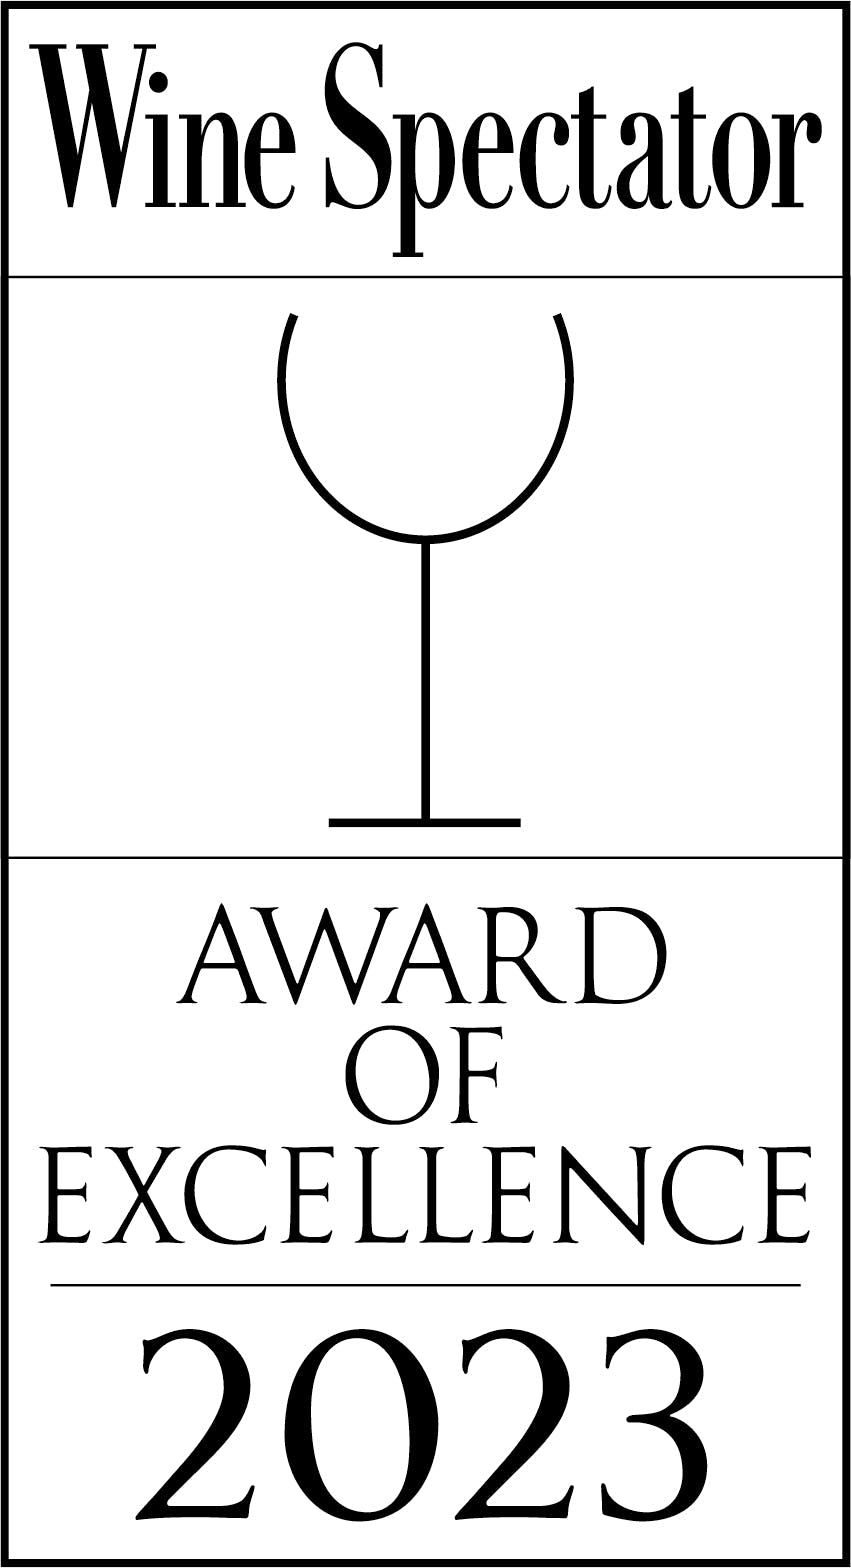 Wine Spectator Award of Excellence in black and white